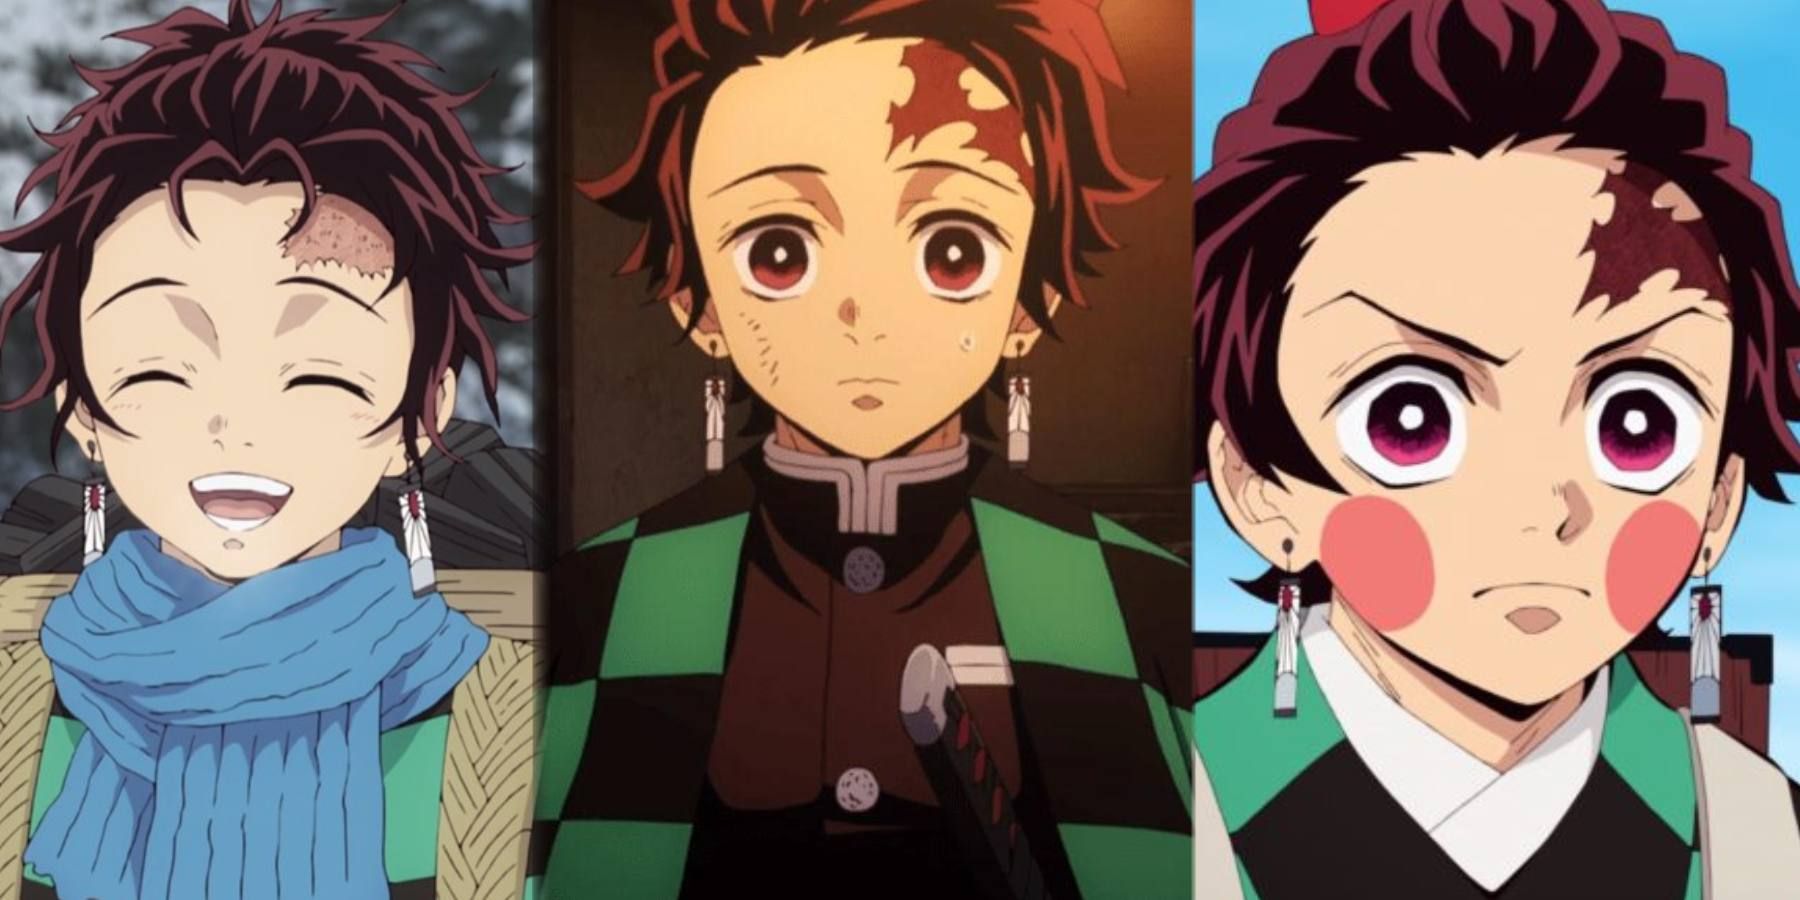 All You Need to Know About Tanjiro Kamado